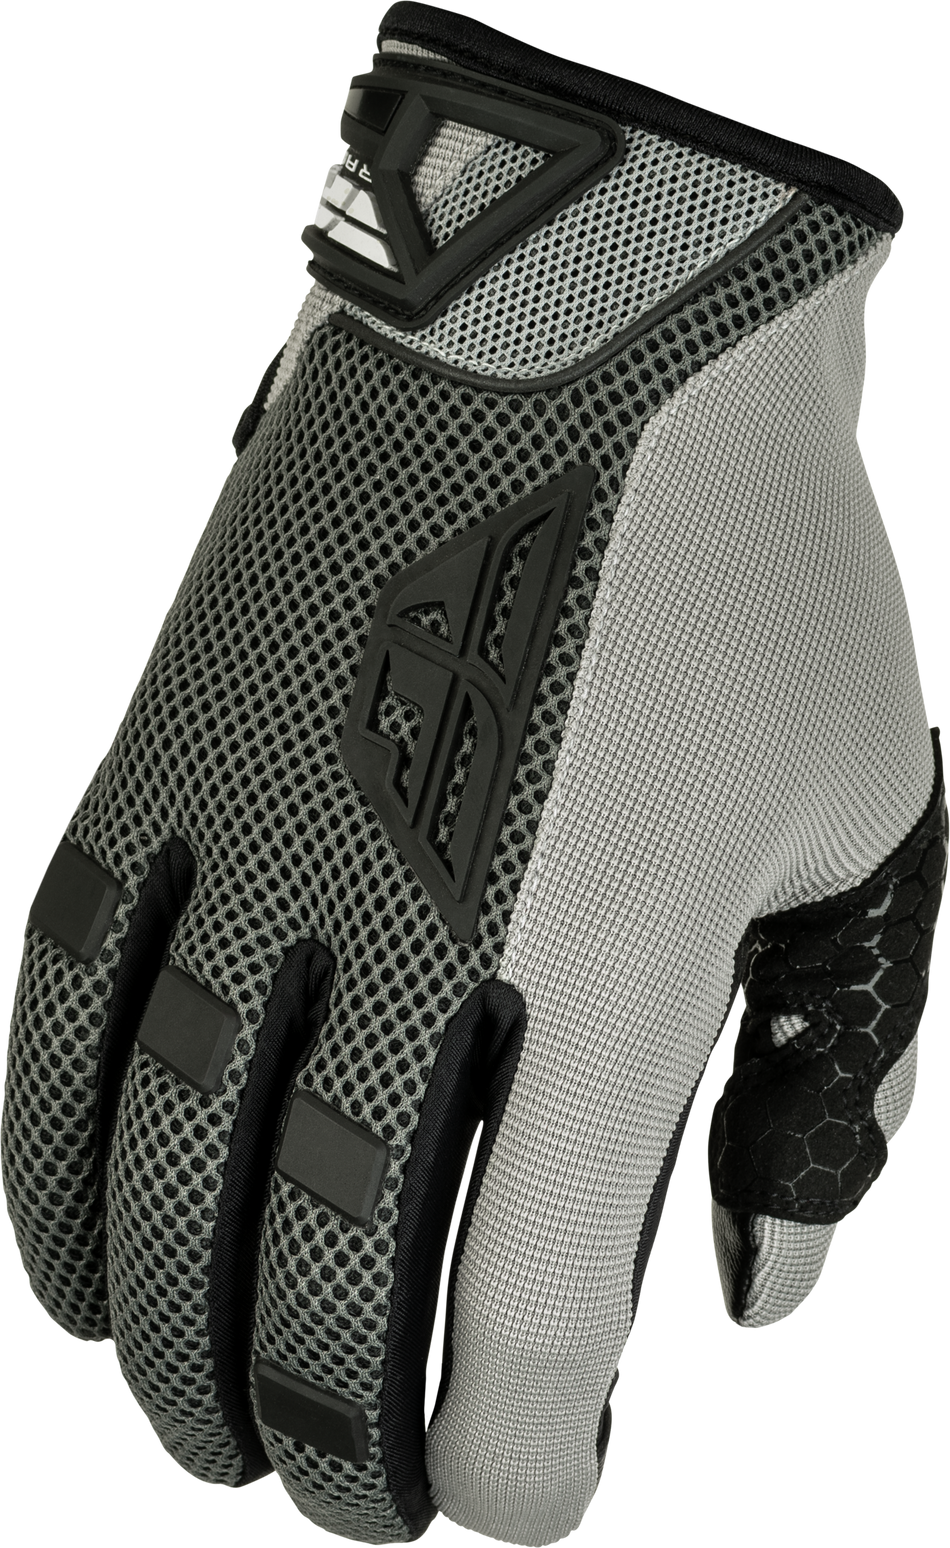 FLY RACING Coolpro Gloves Grey Sm 476-4025S